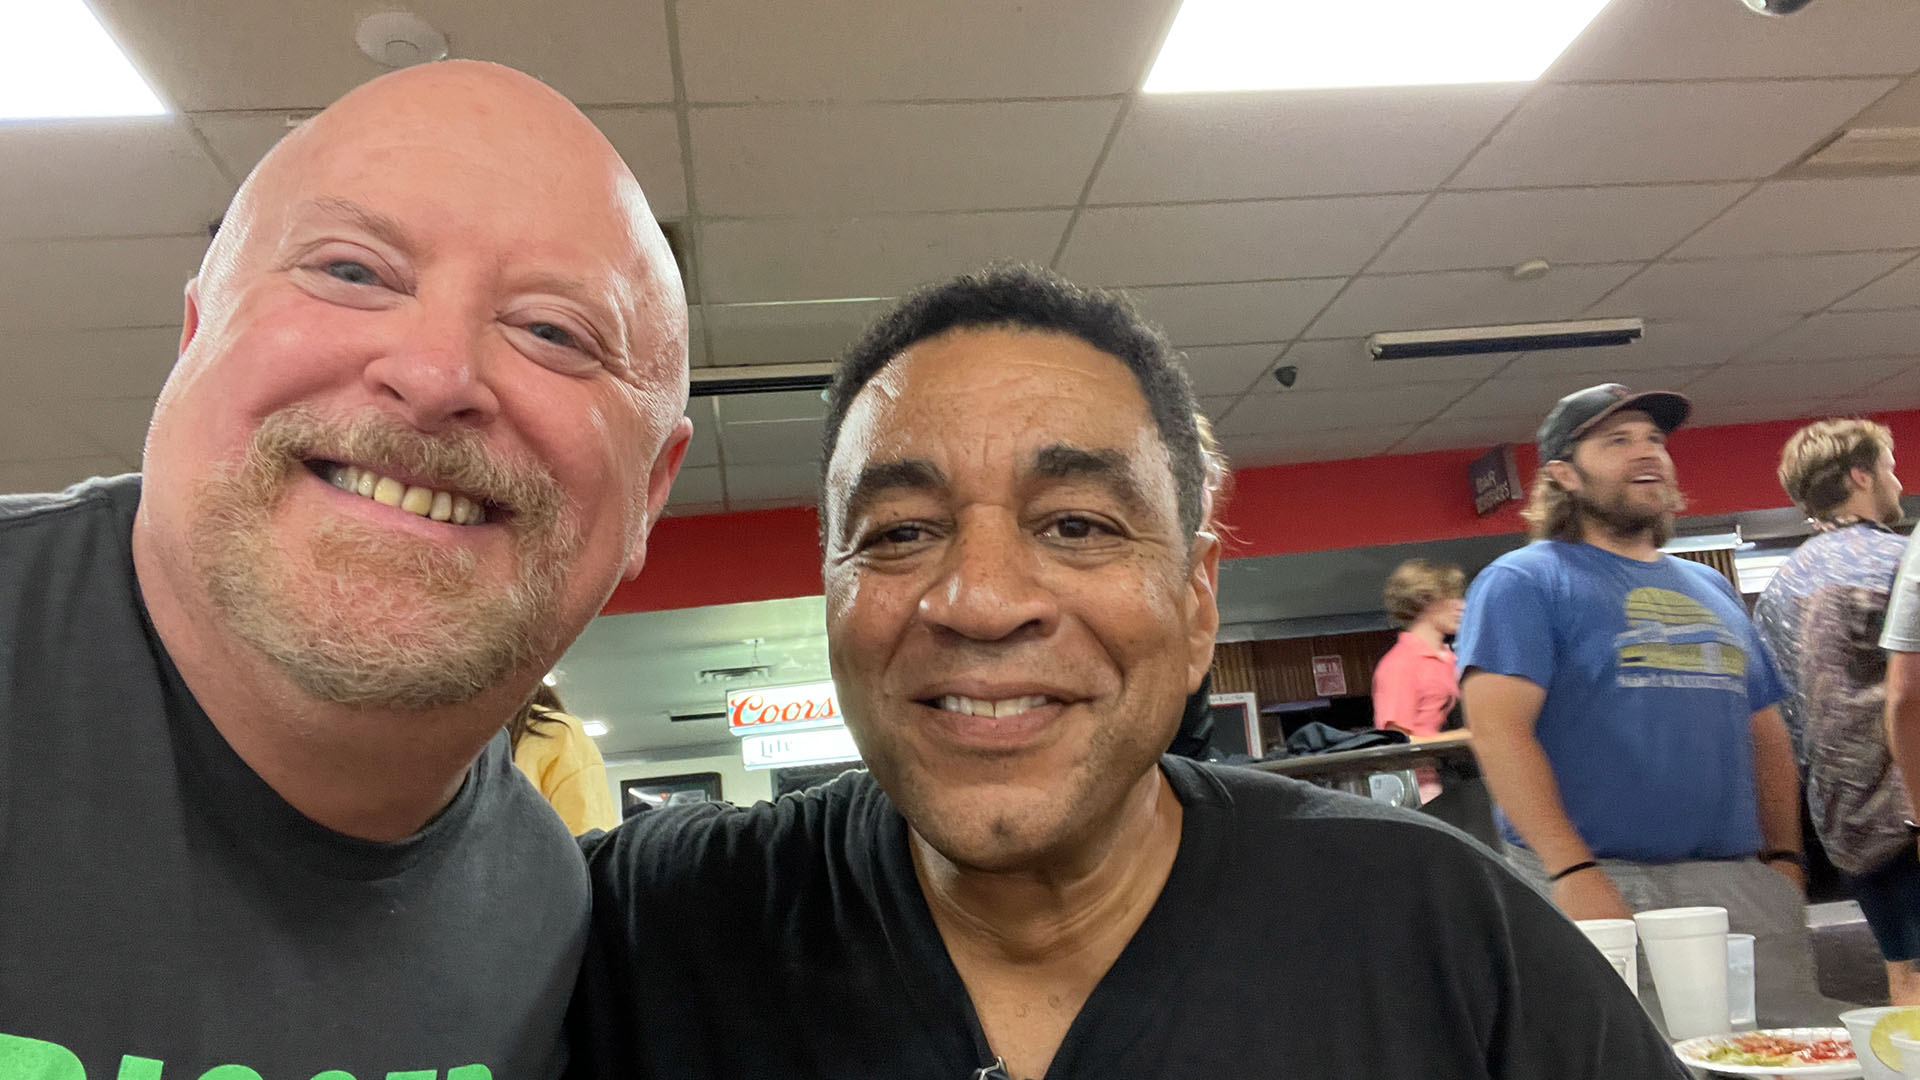 Destination Heaven Chris Rogers and Harry Lennix bowling at the Wrap Party